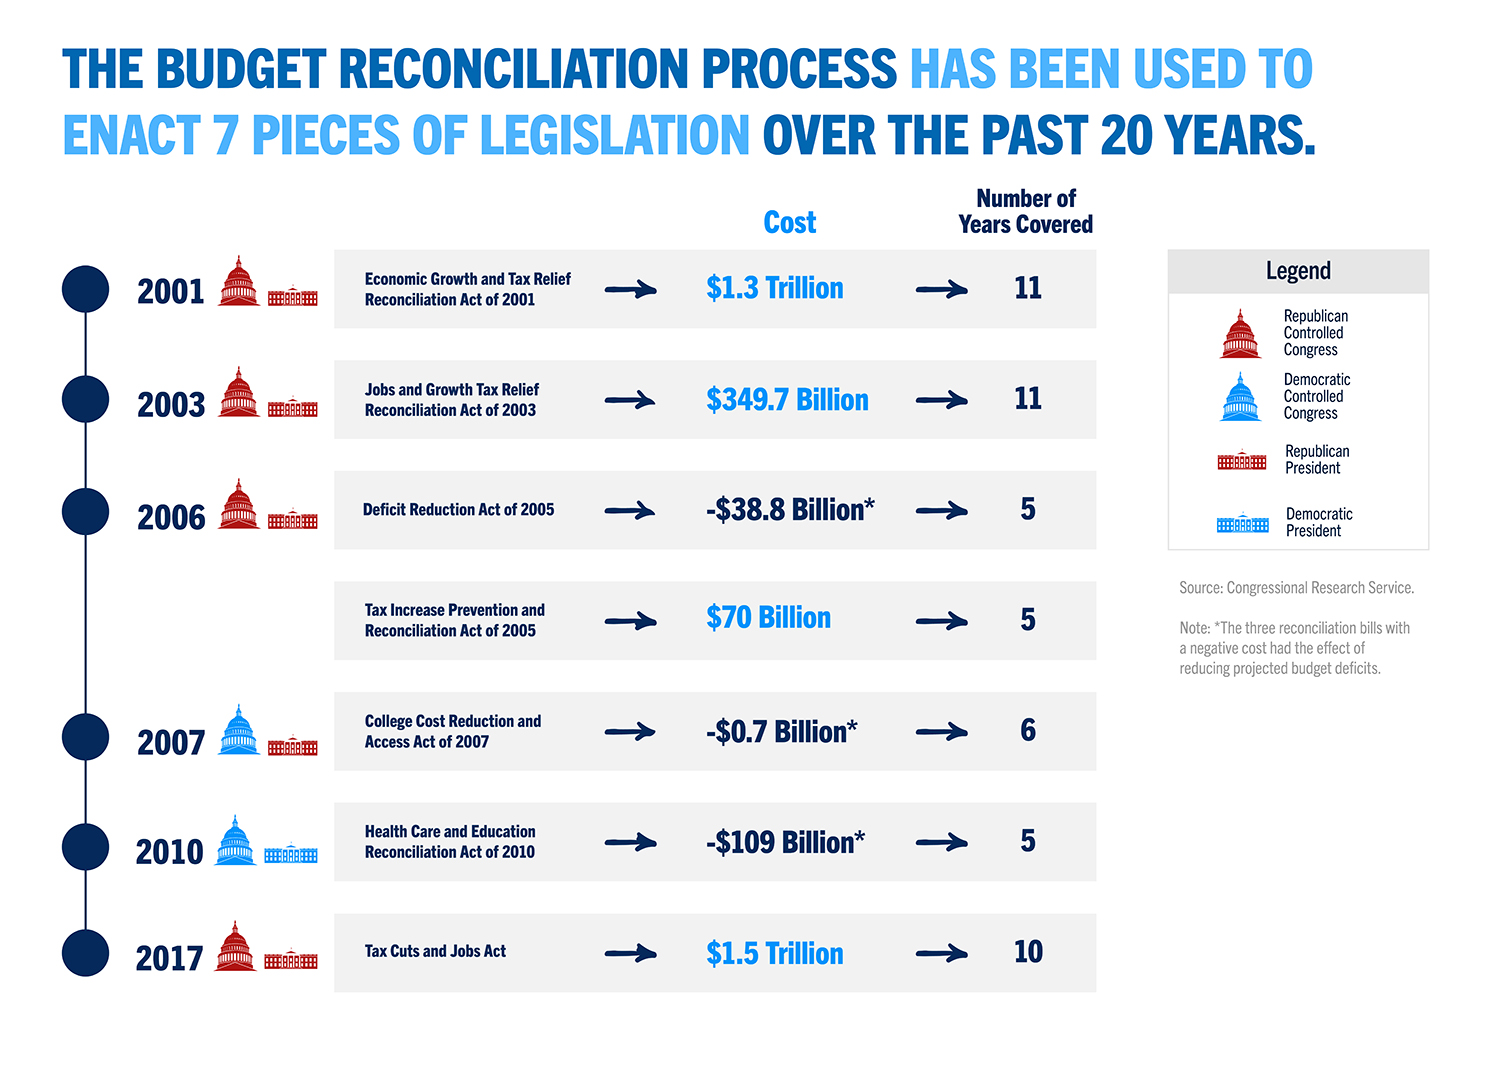 The budget reconciliation process has been used to enact 7 pieces of legislation over the past 20 years.